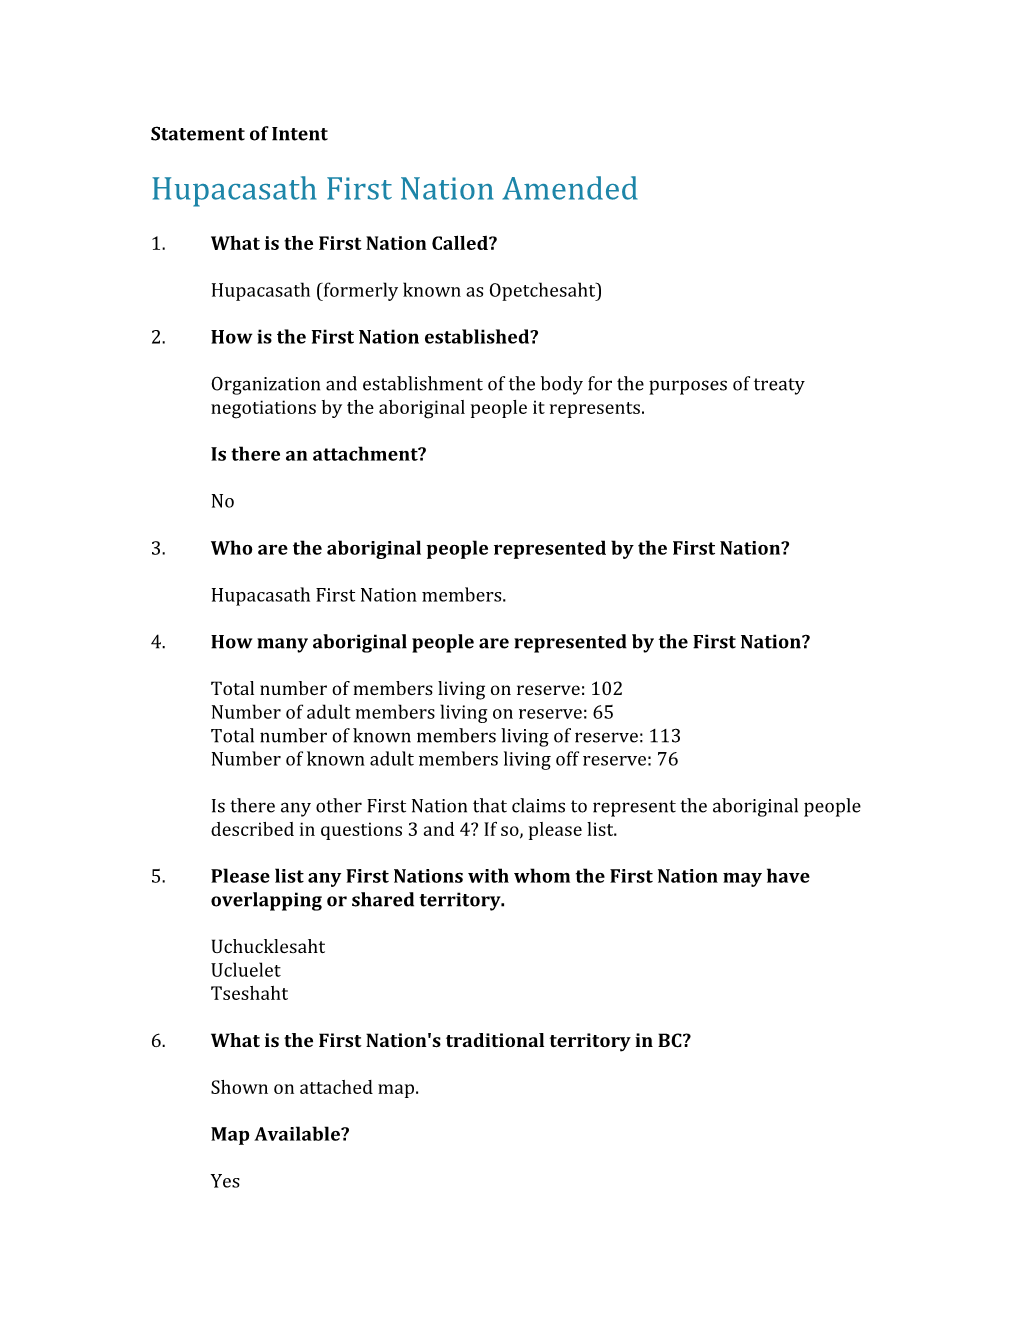 Hupacasath First Nation Amended